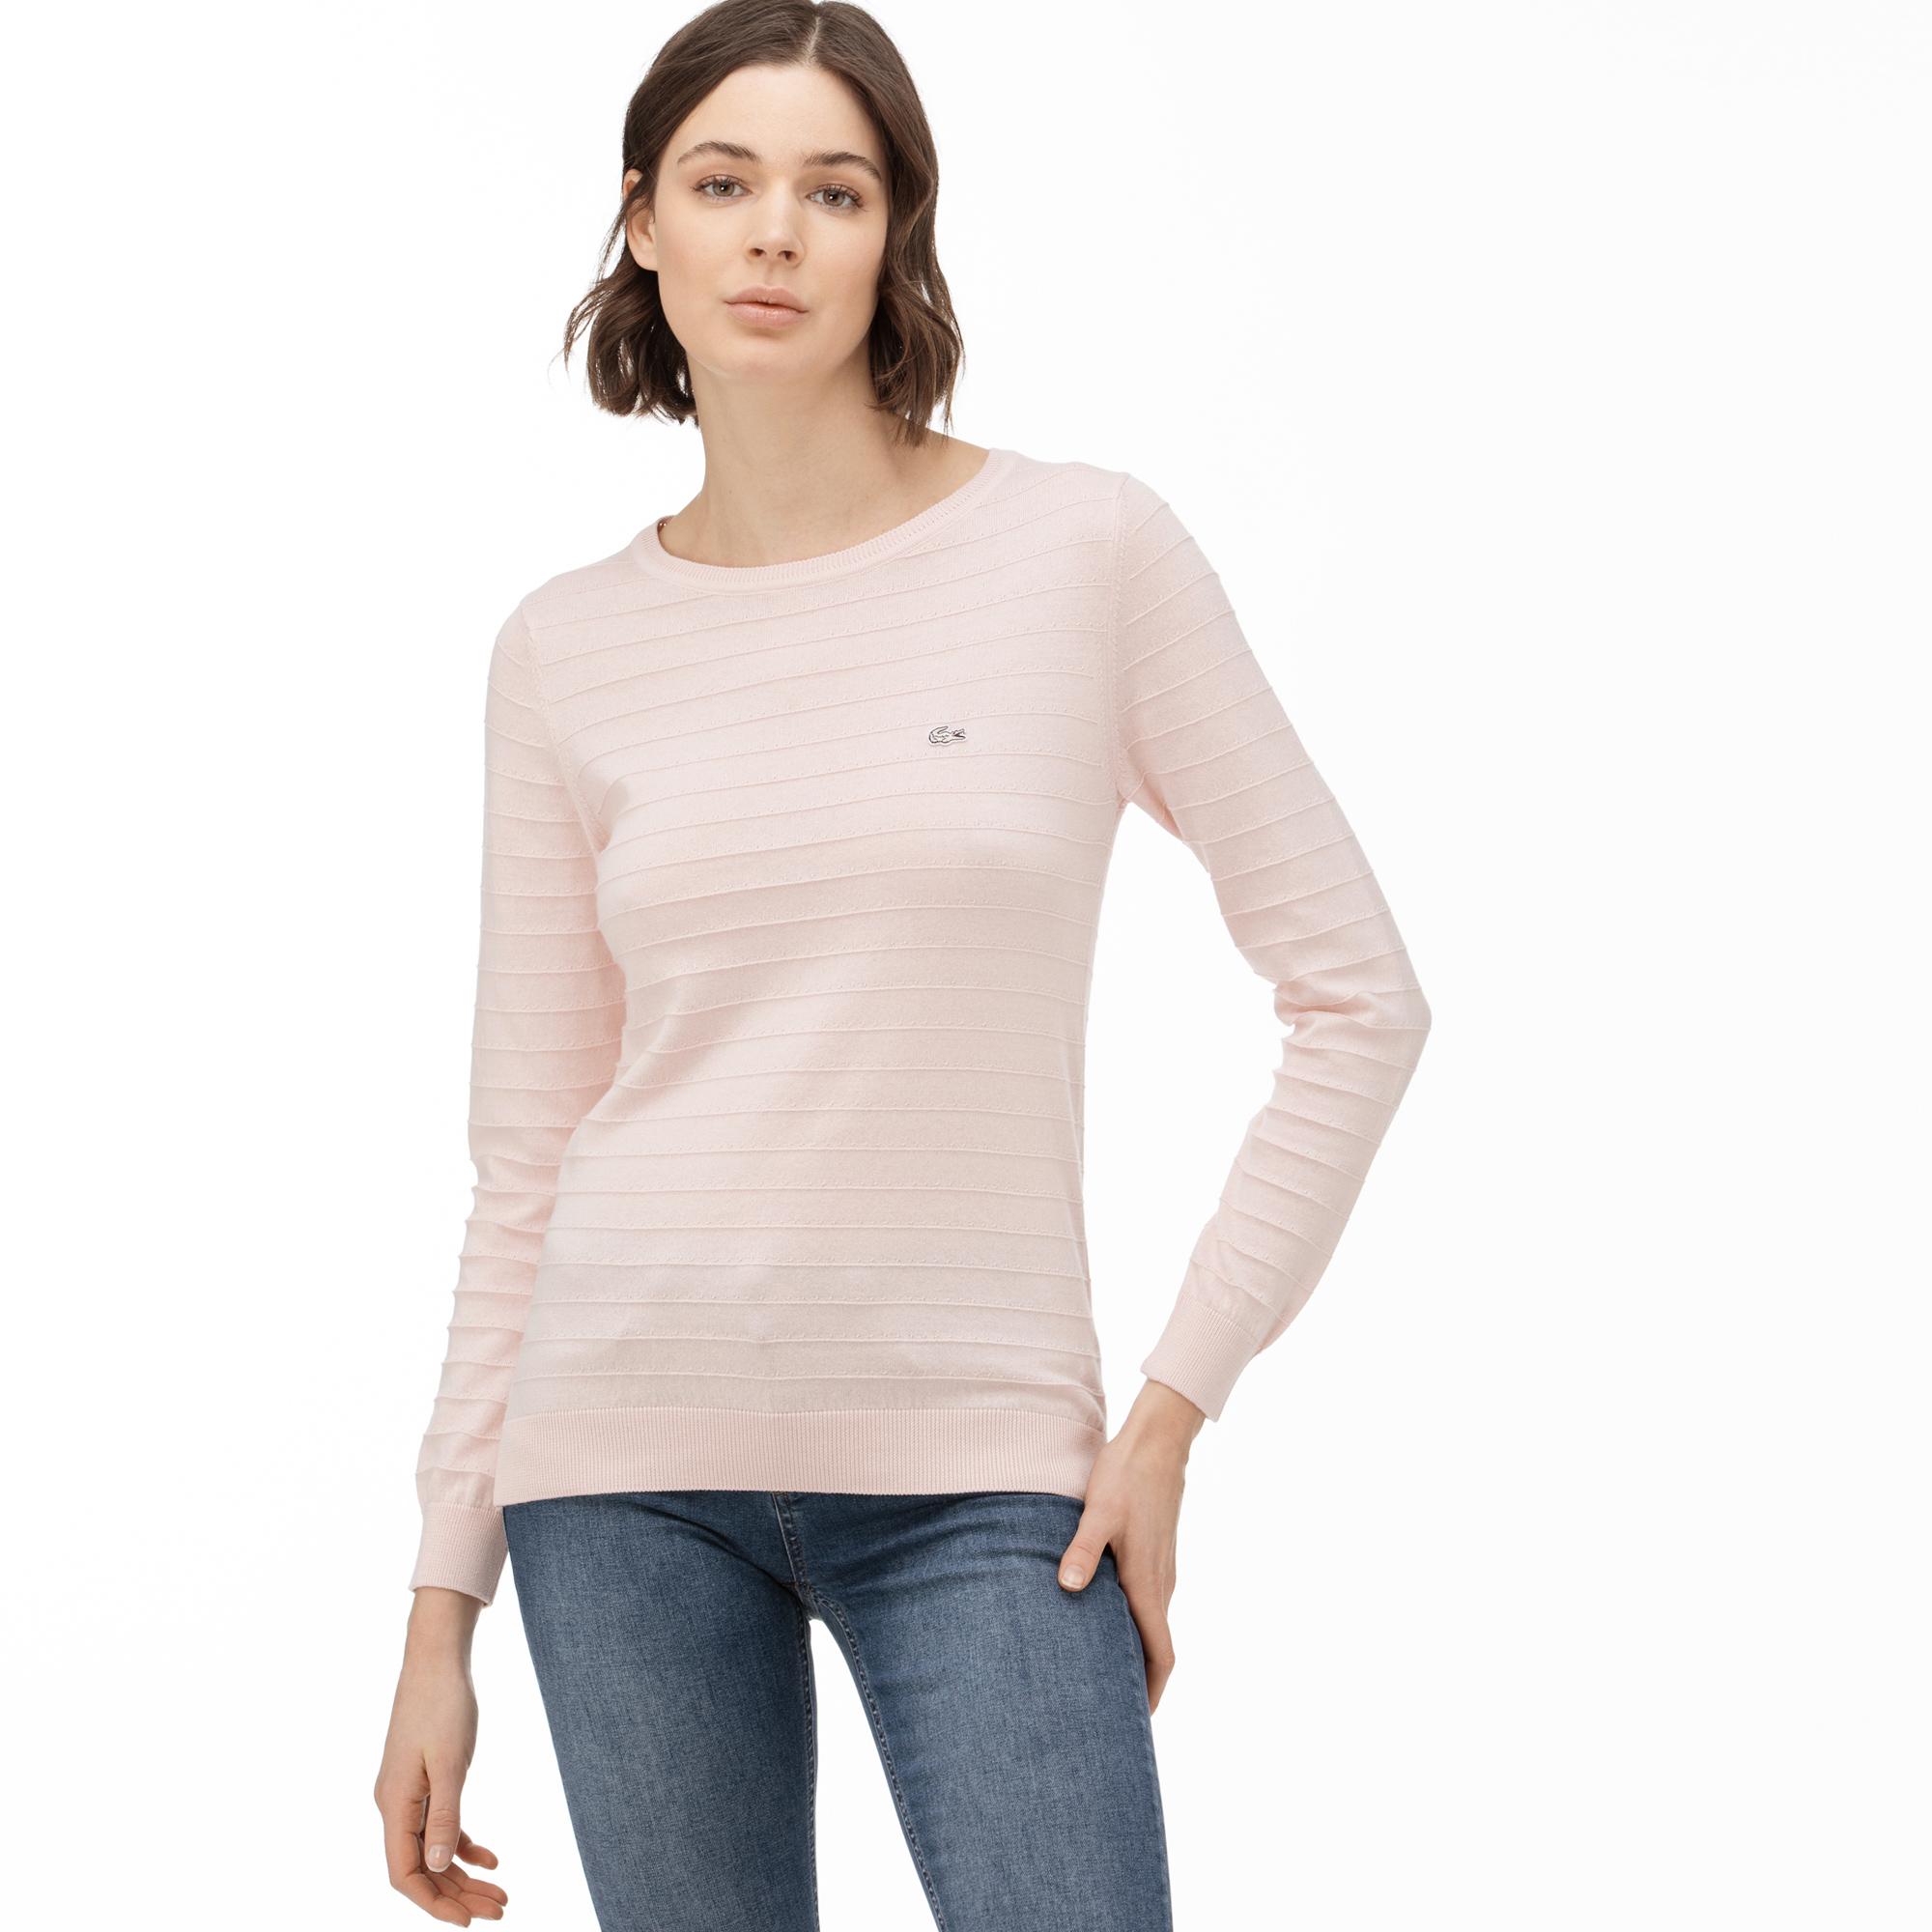 Lacoste Women's Round Neck Patterned Tricot Sweater